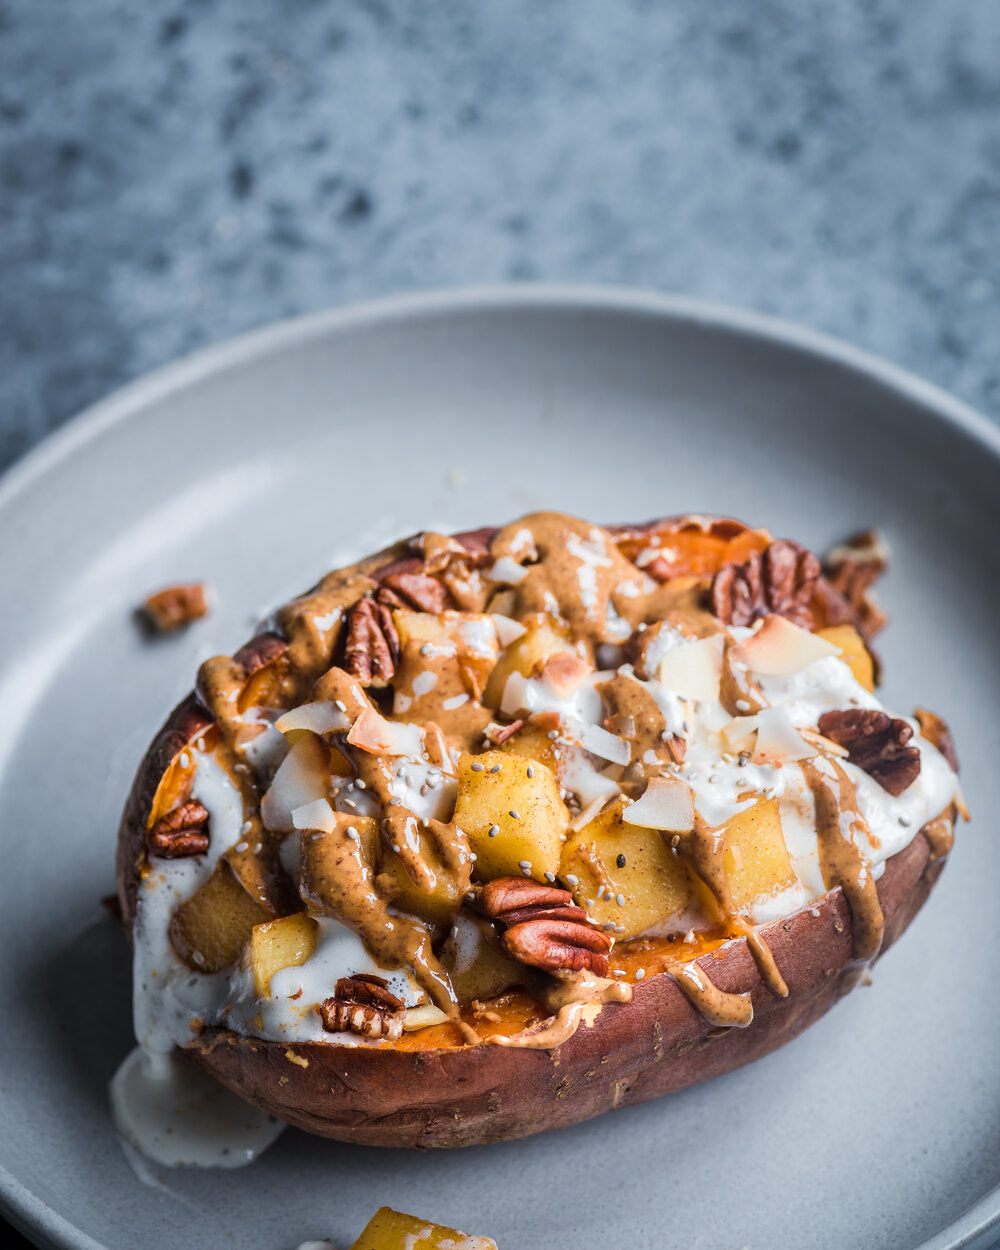 A sweet potato filled with apples, coconut flakes, almond butter, and nuts.